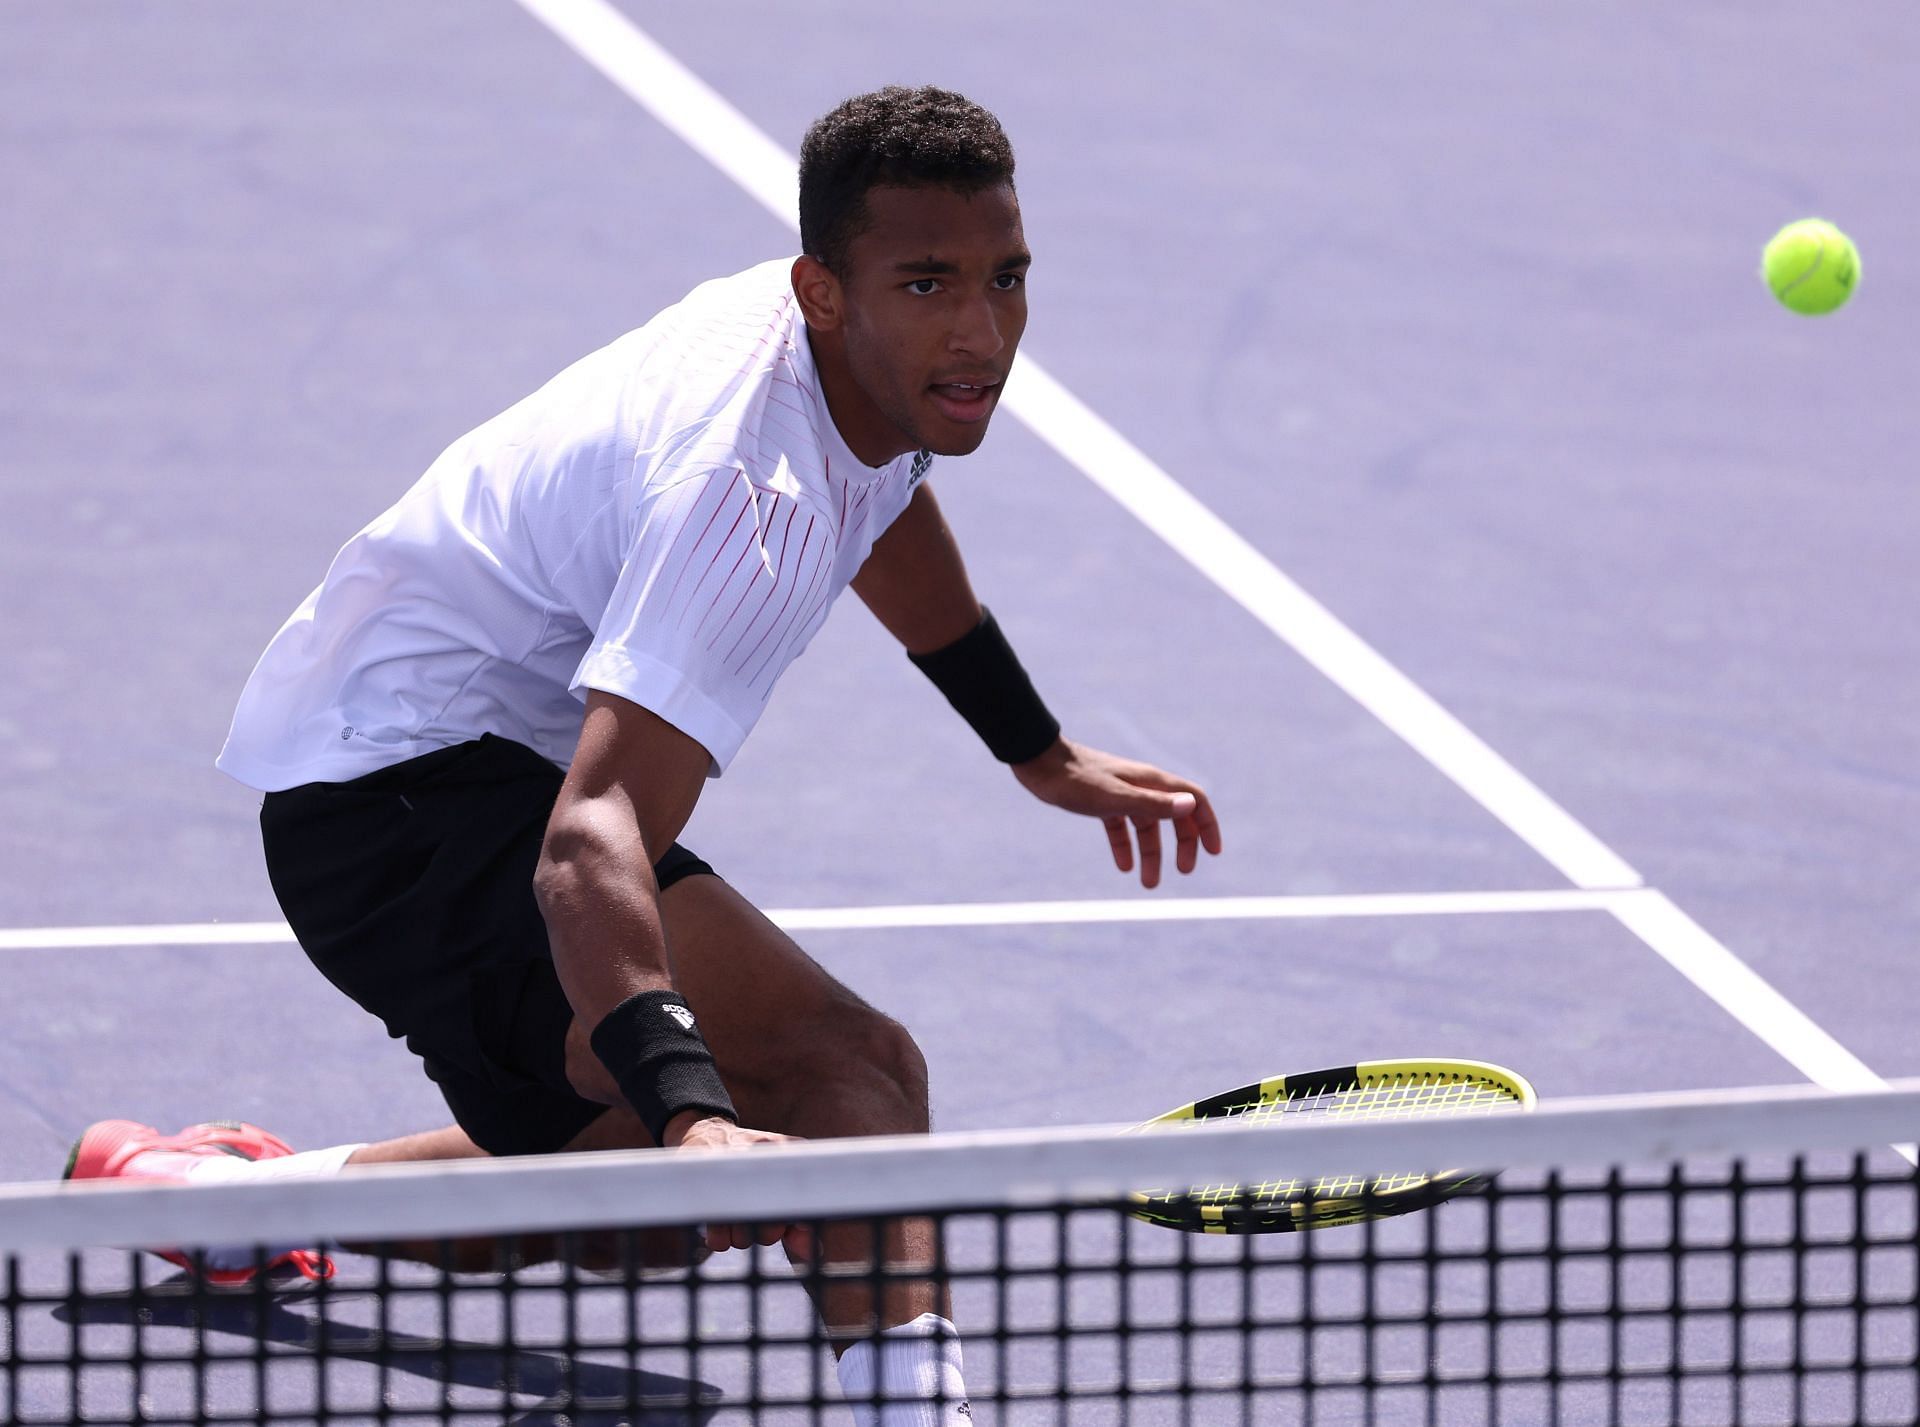 Auger-Aliassime has won 15 out of 20 matches this year so far